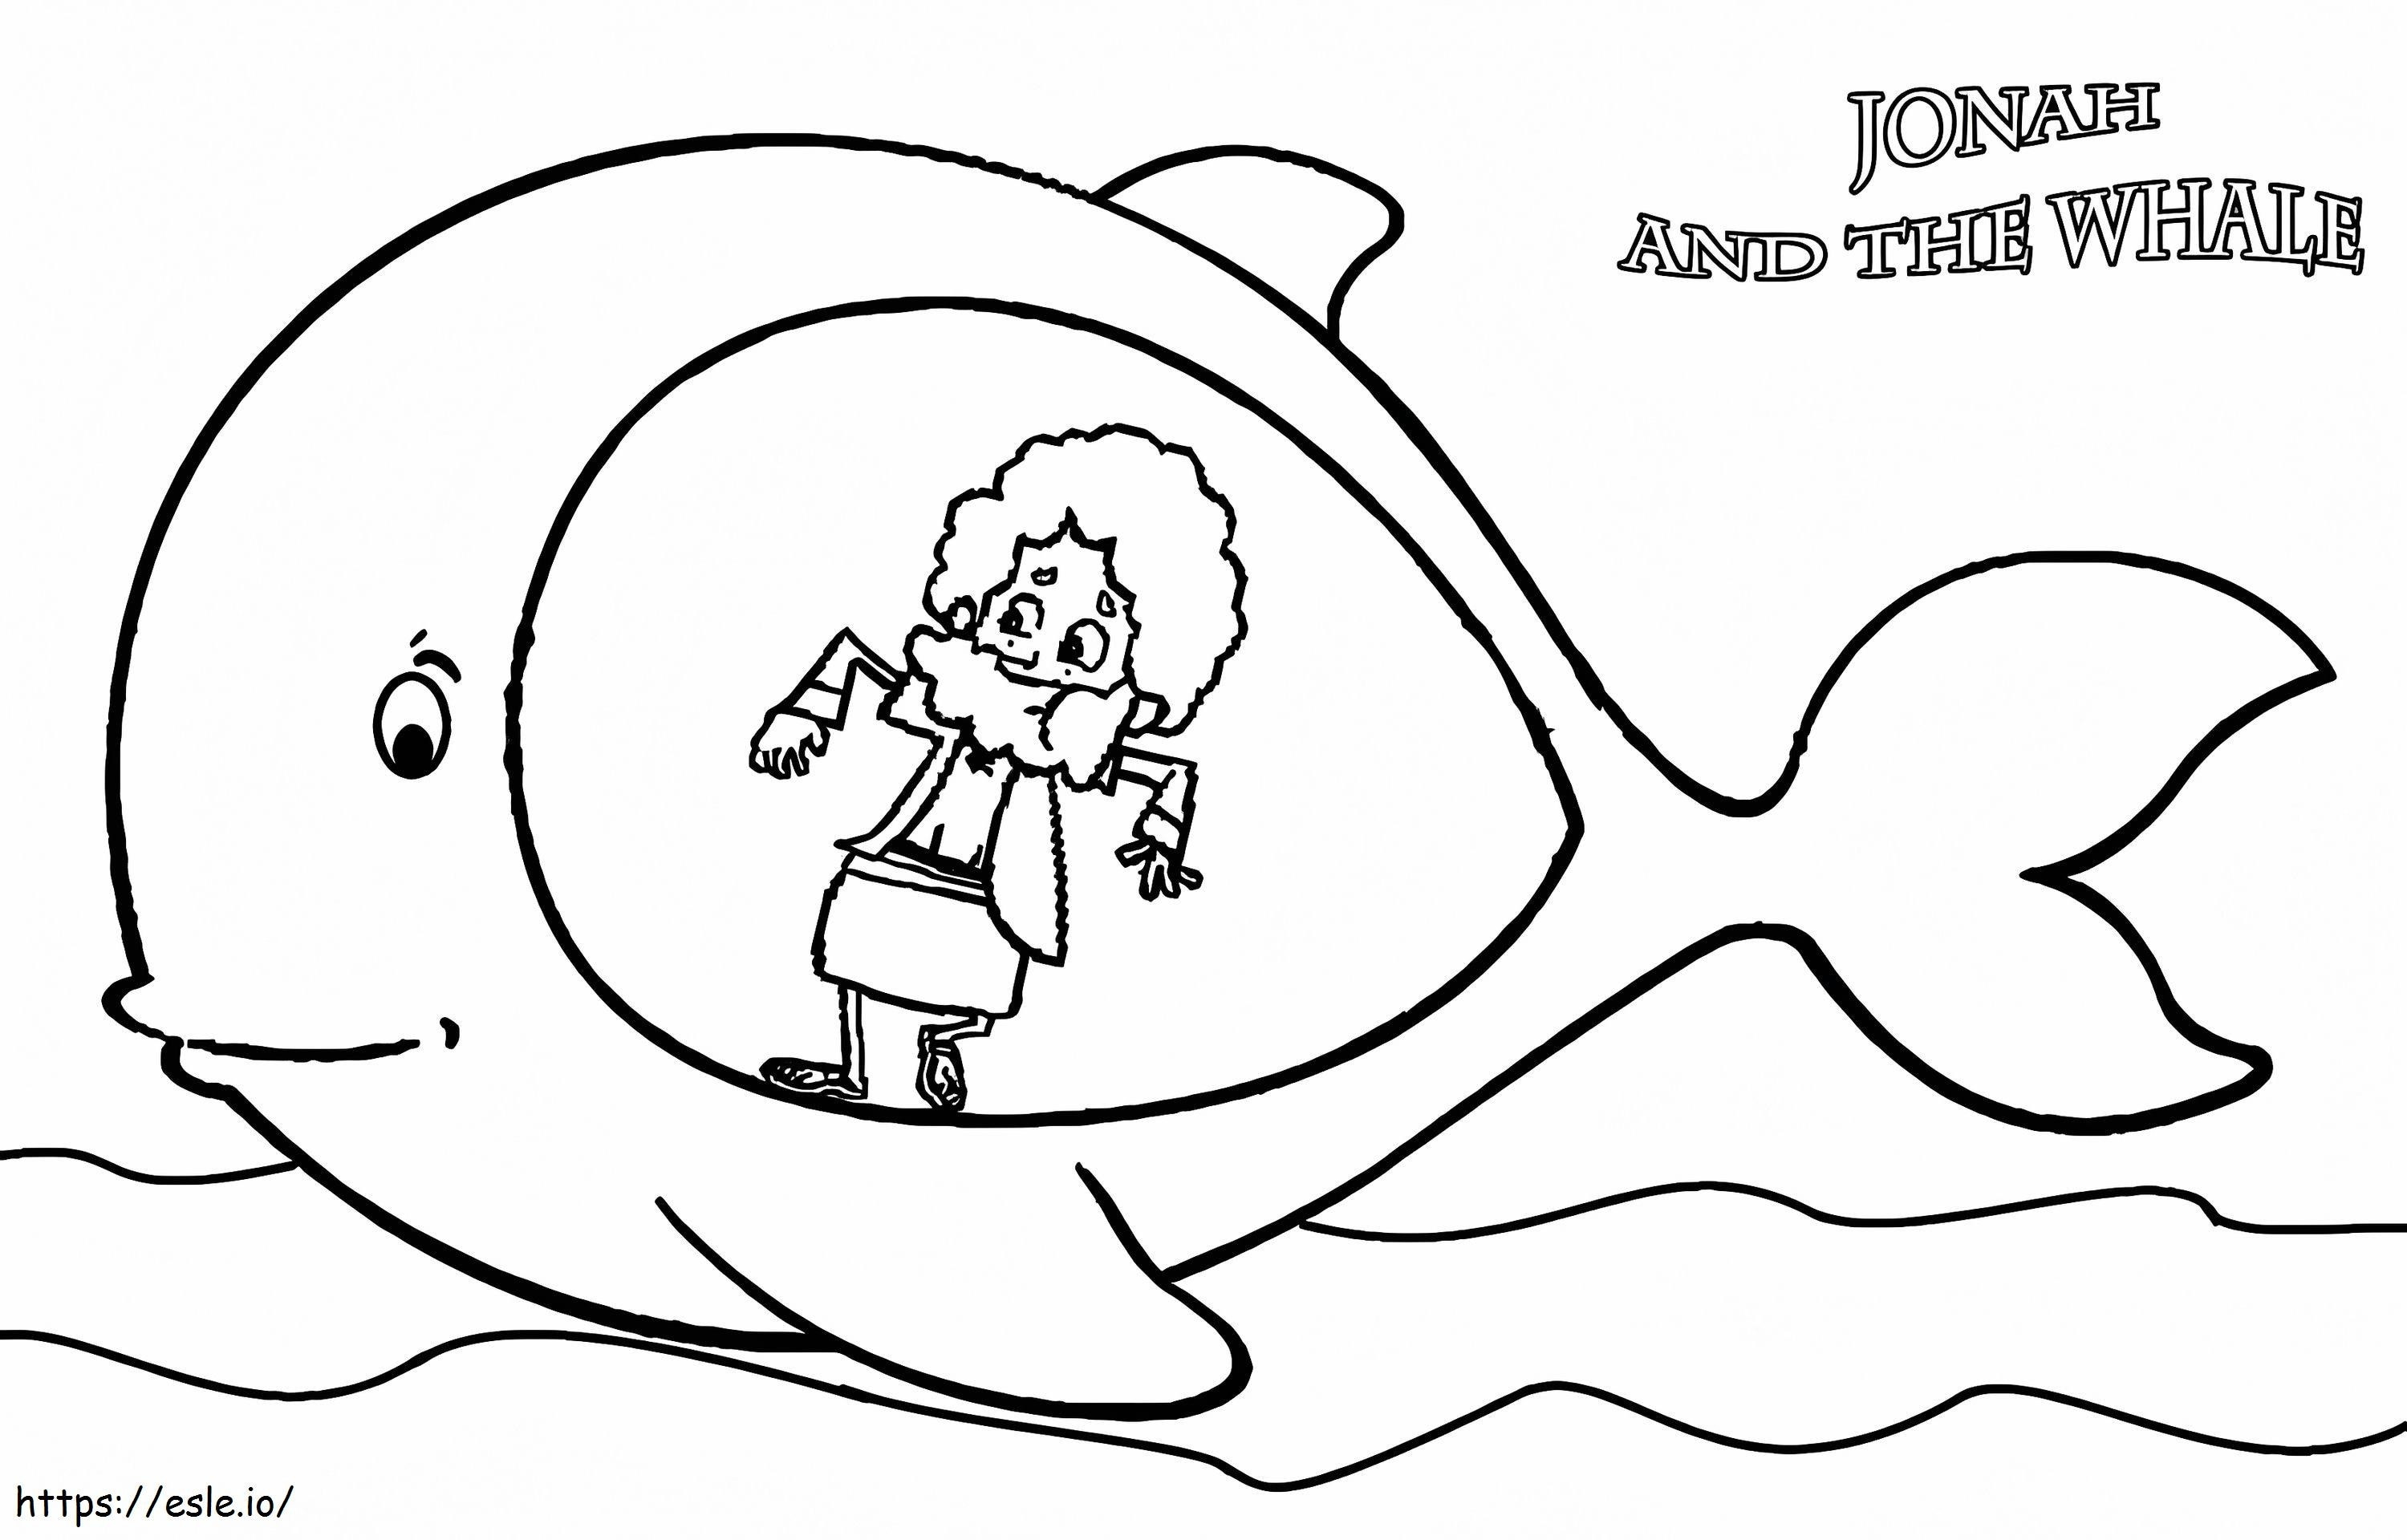 Jonah And The Whale 26 coloring page